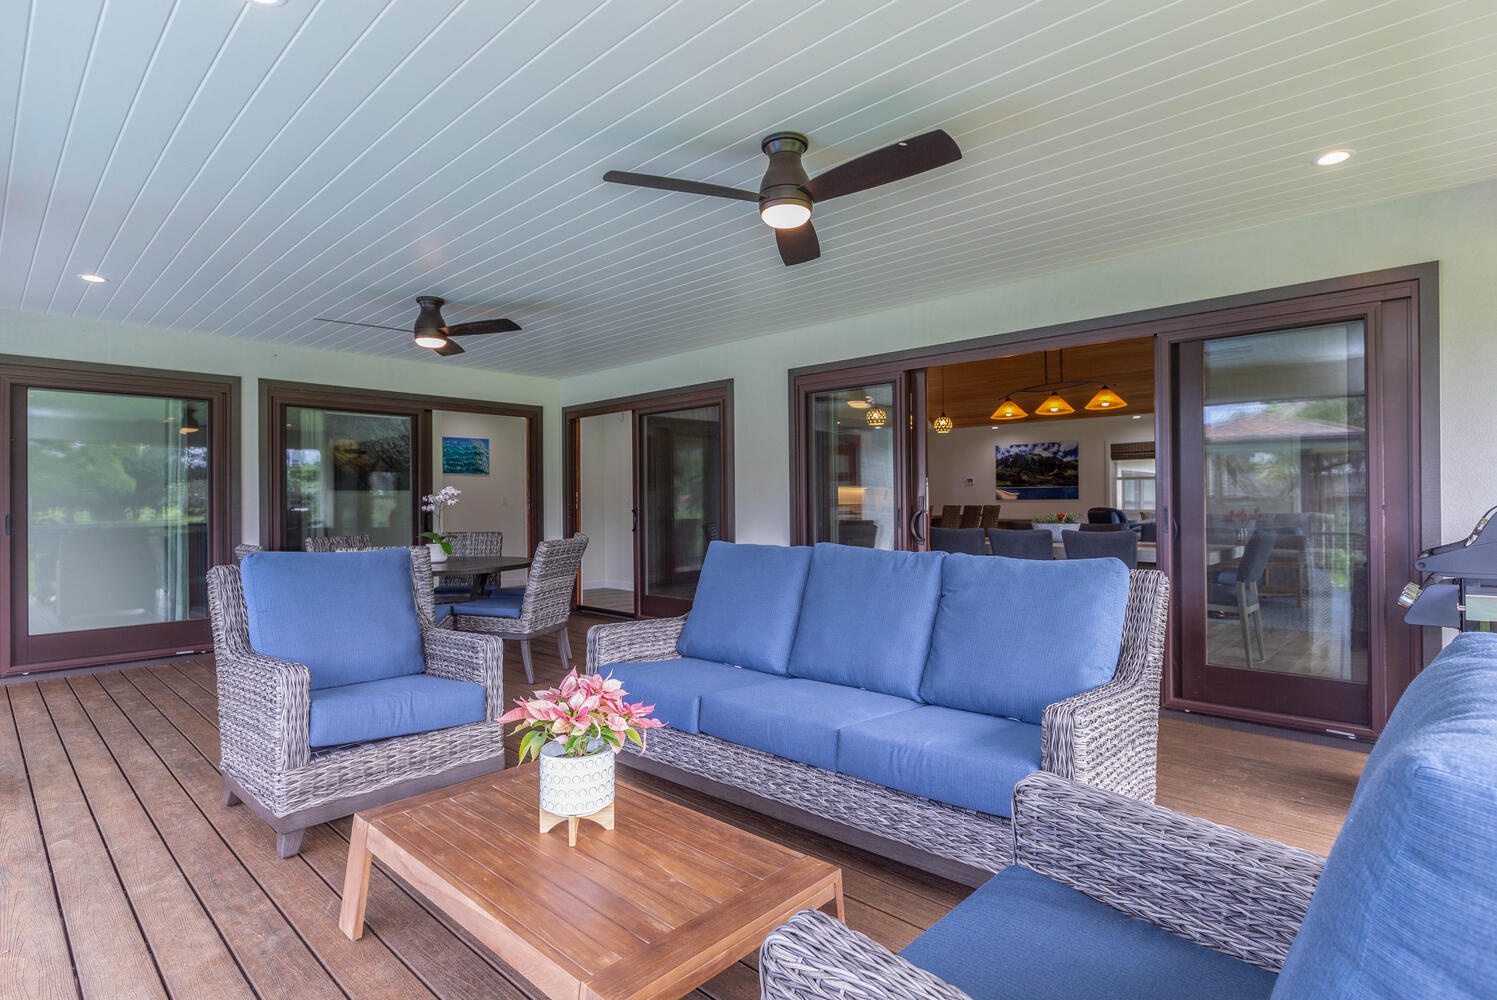 Princeville Vacation Rentals, Aloha Villa - Outdoor seating for your whole group.